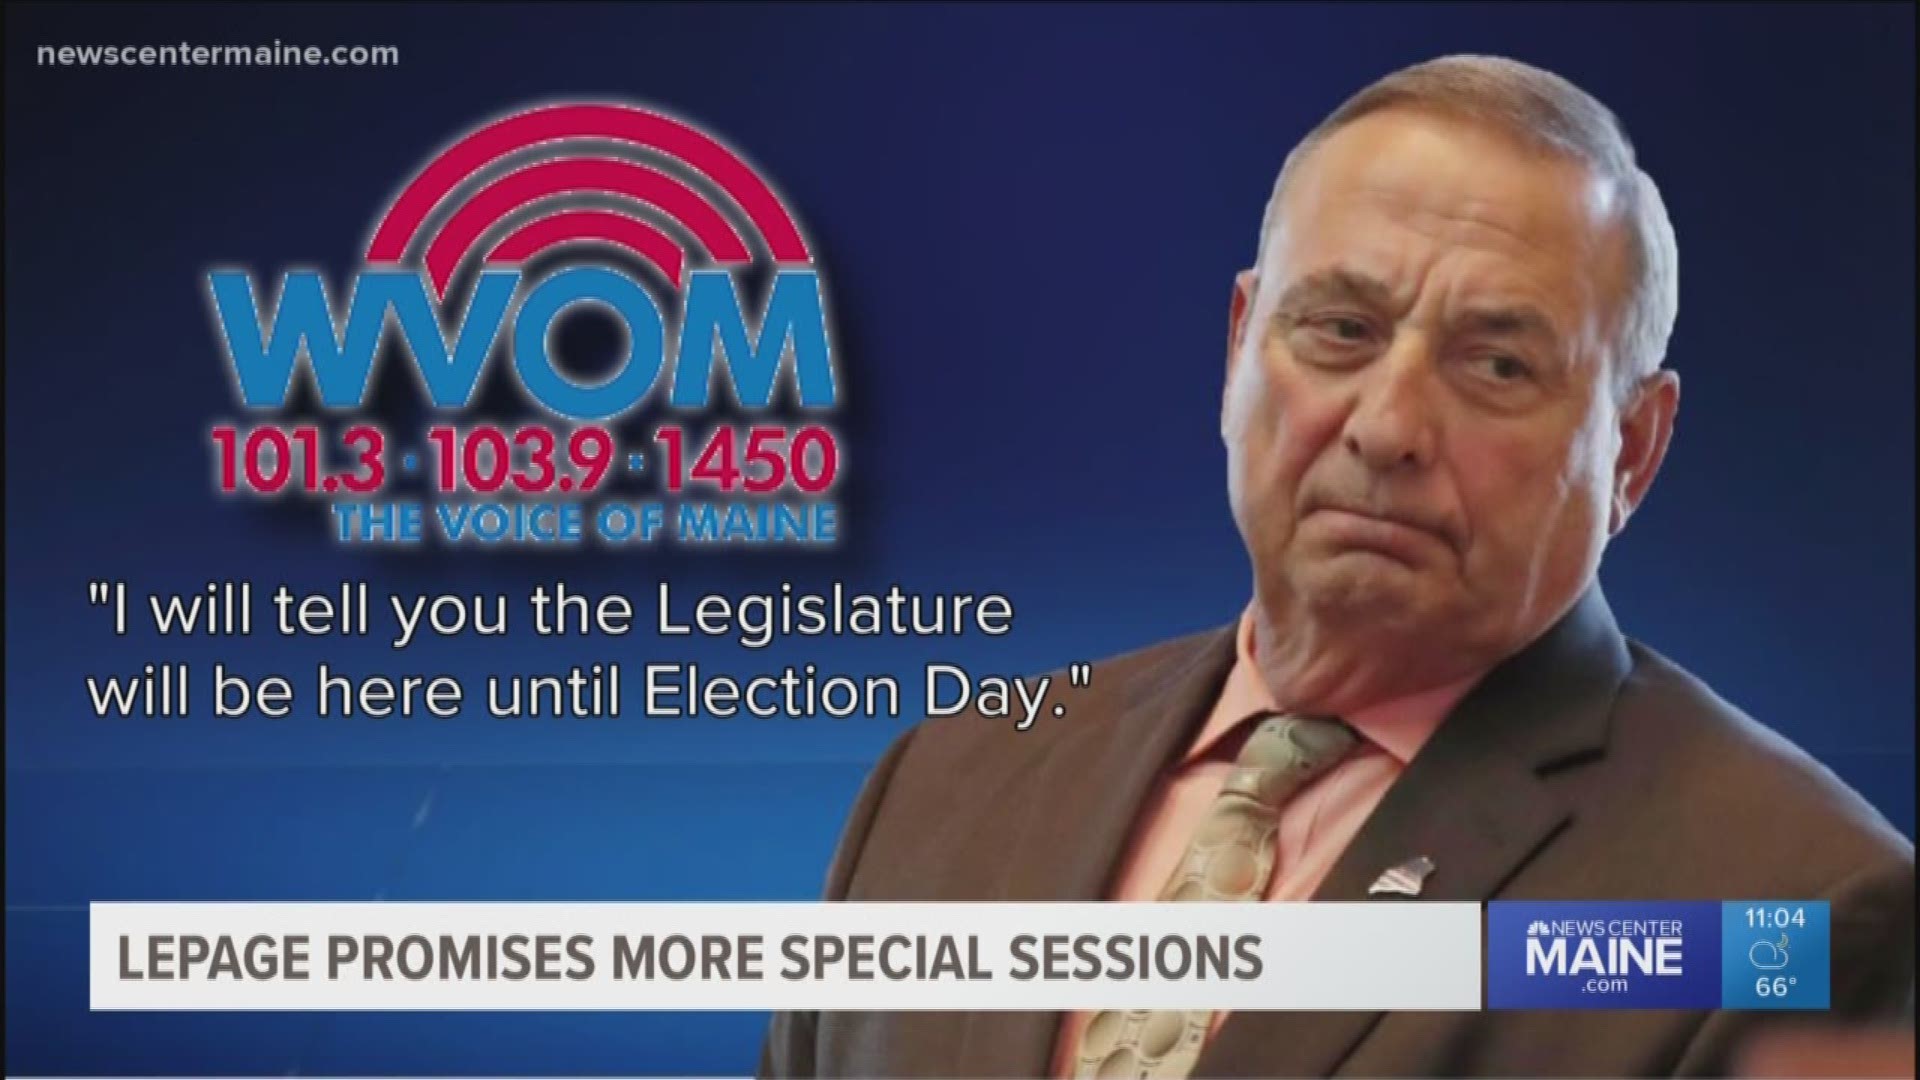 LePage promises more special sessions